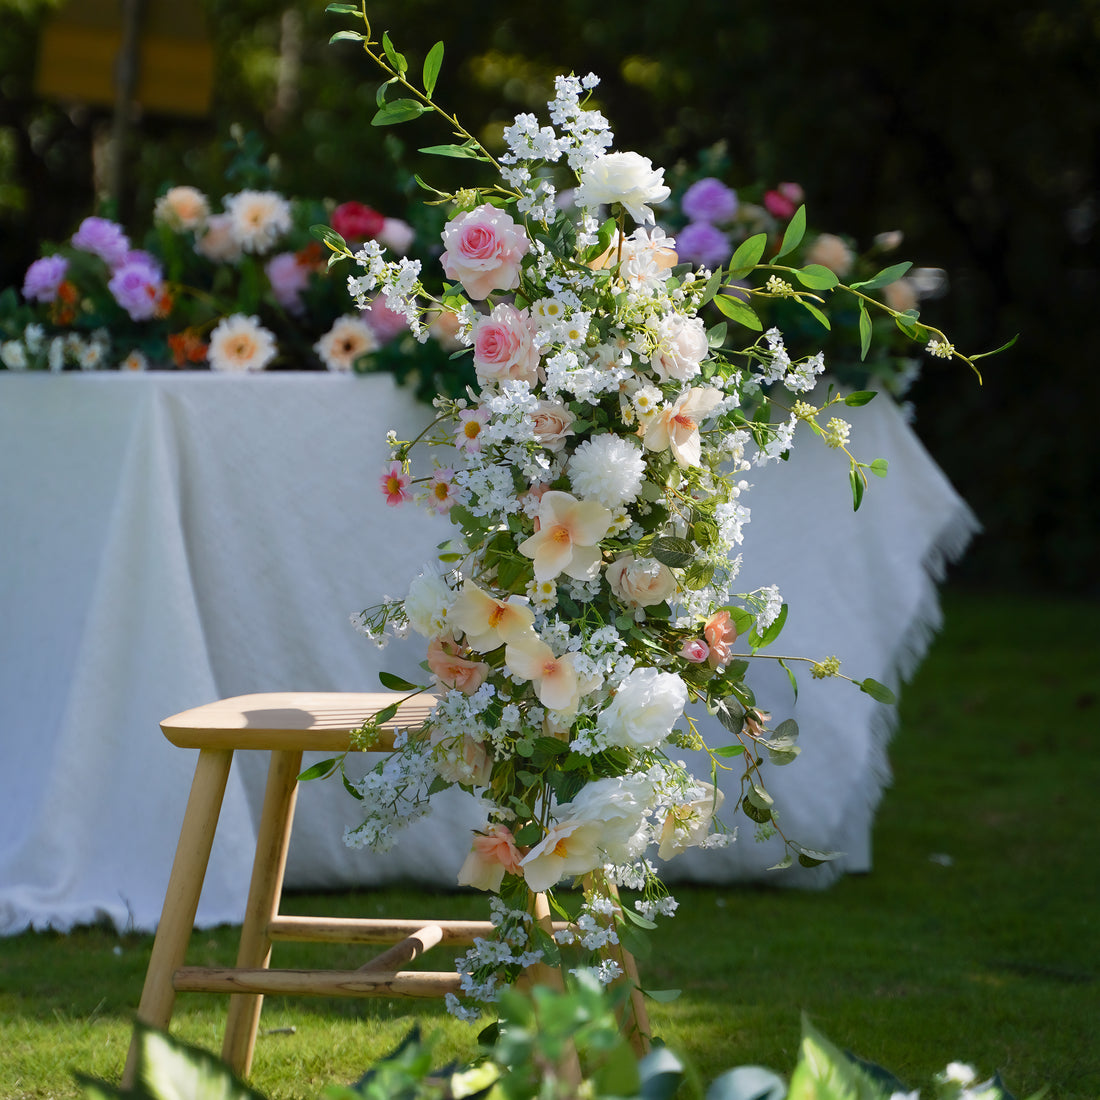 W035:Outdoor Wedding Decorative Chair Back Flowers Rose Morning